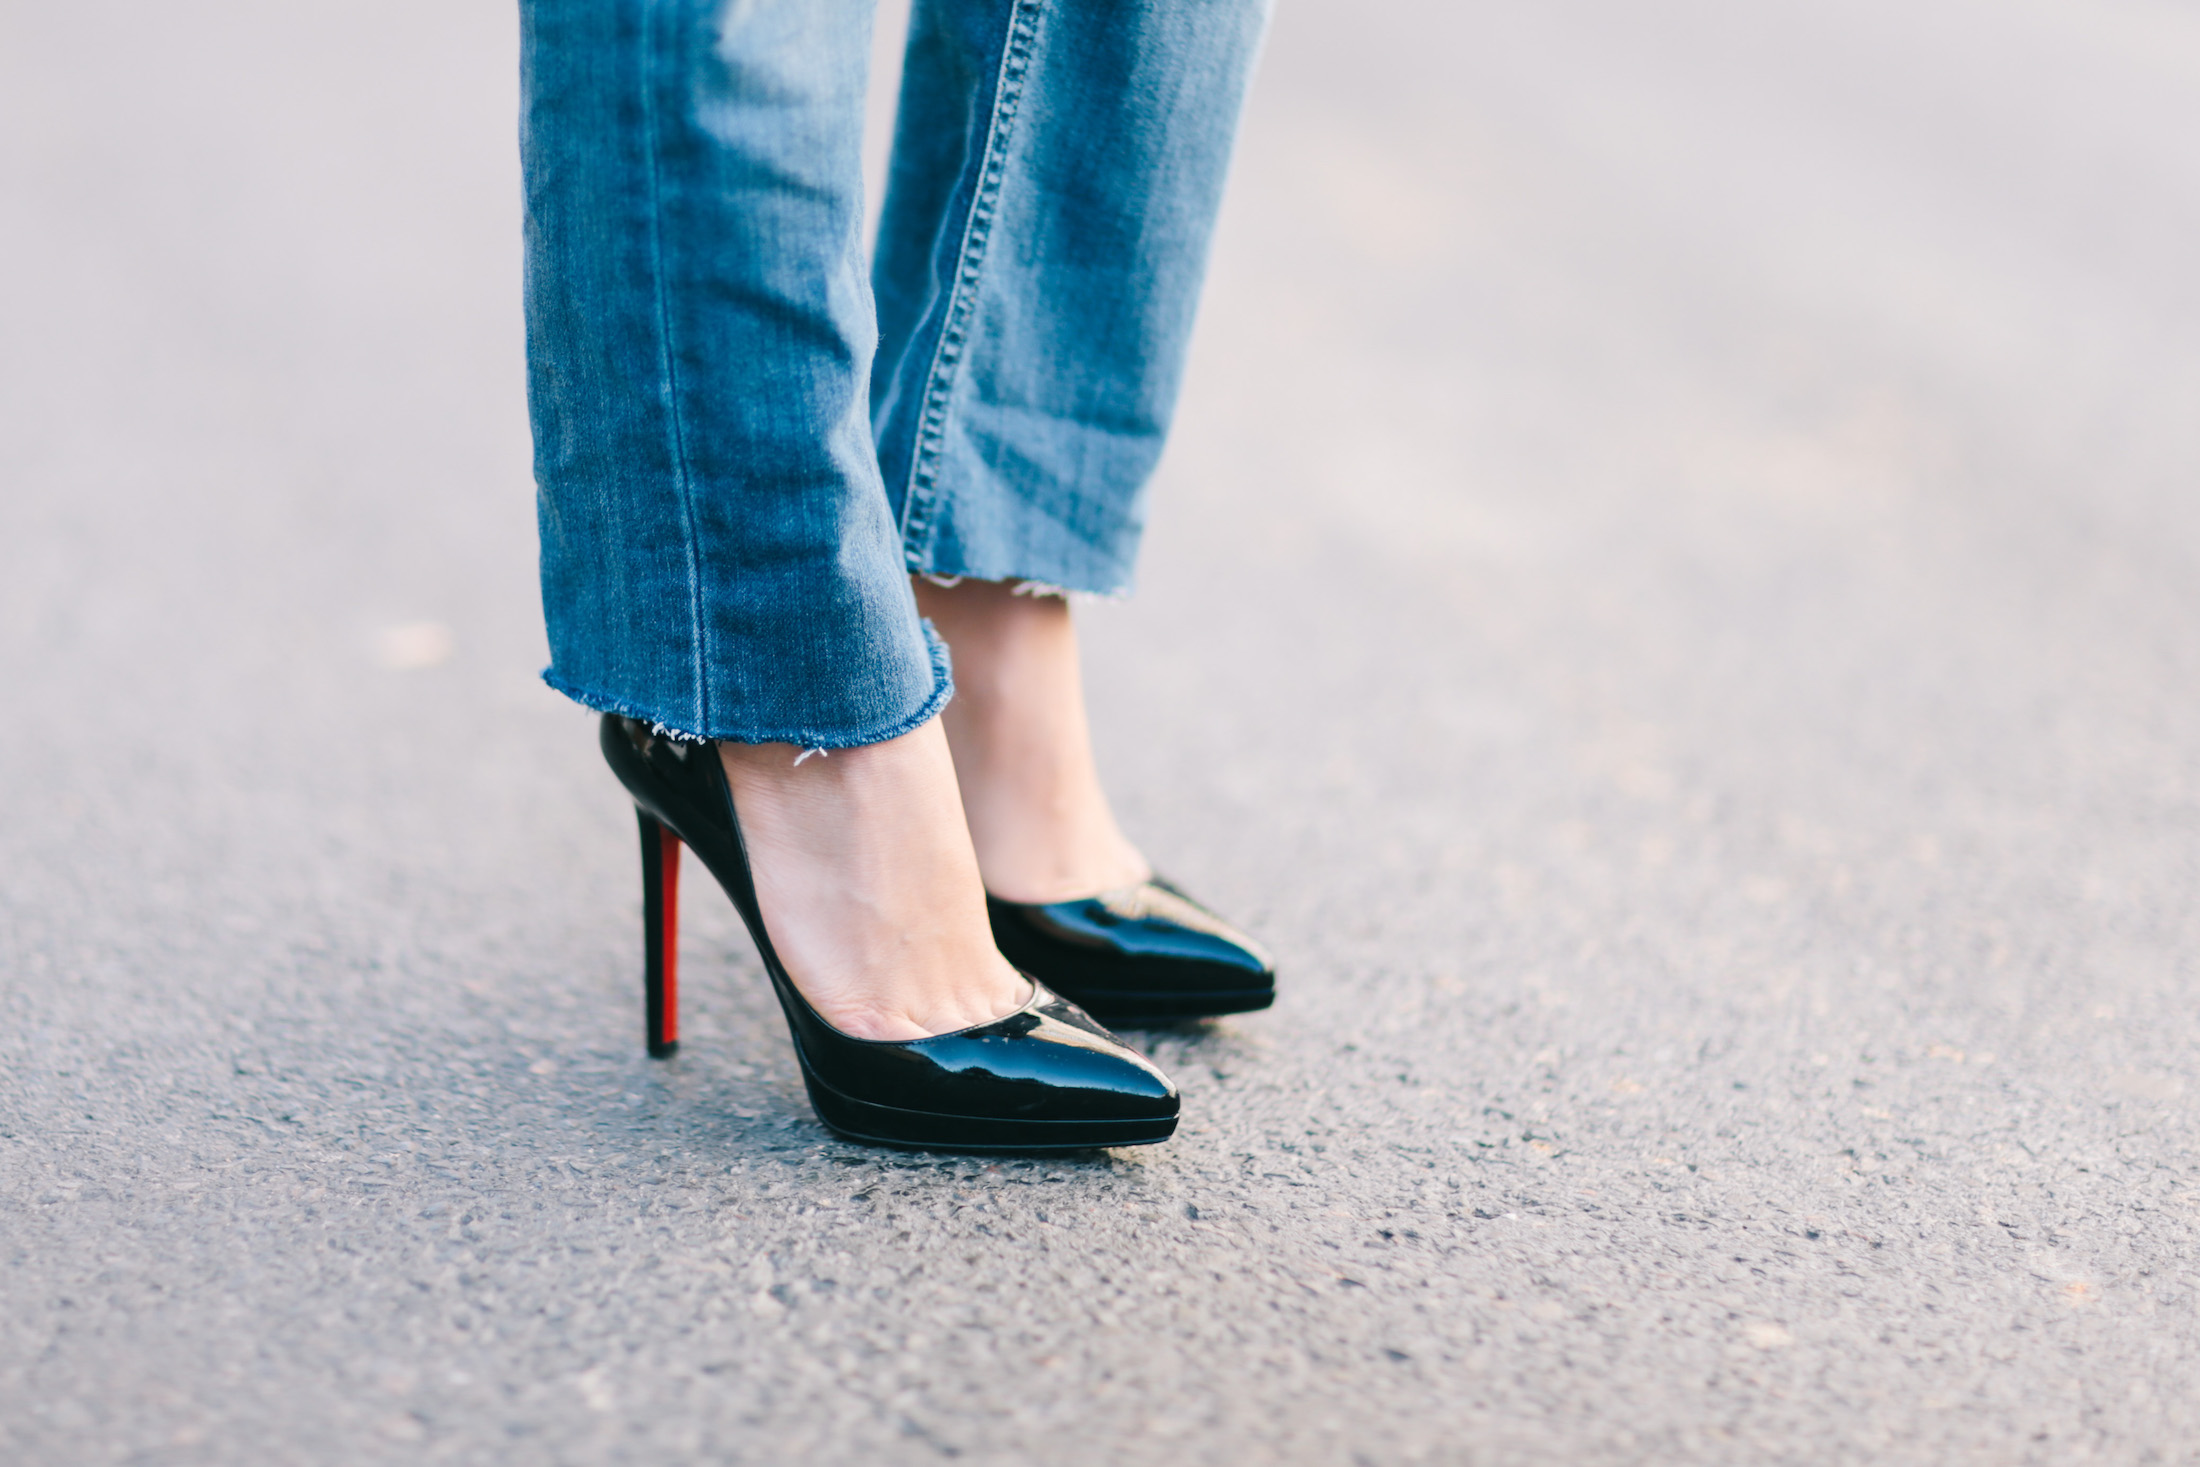 Shoe lover recreates Christian Louboutin heels for just $40